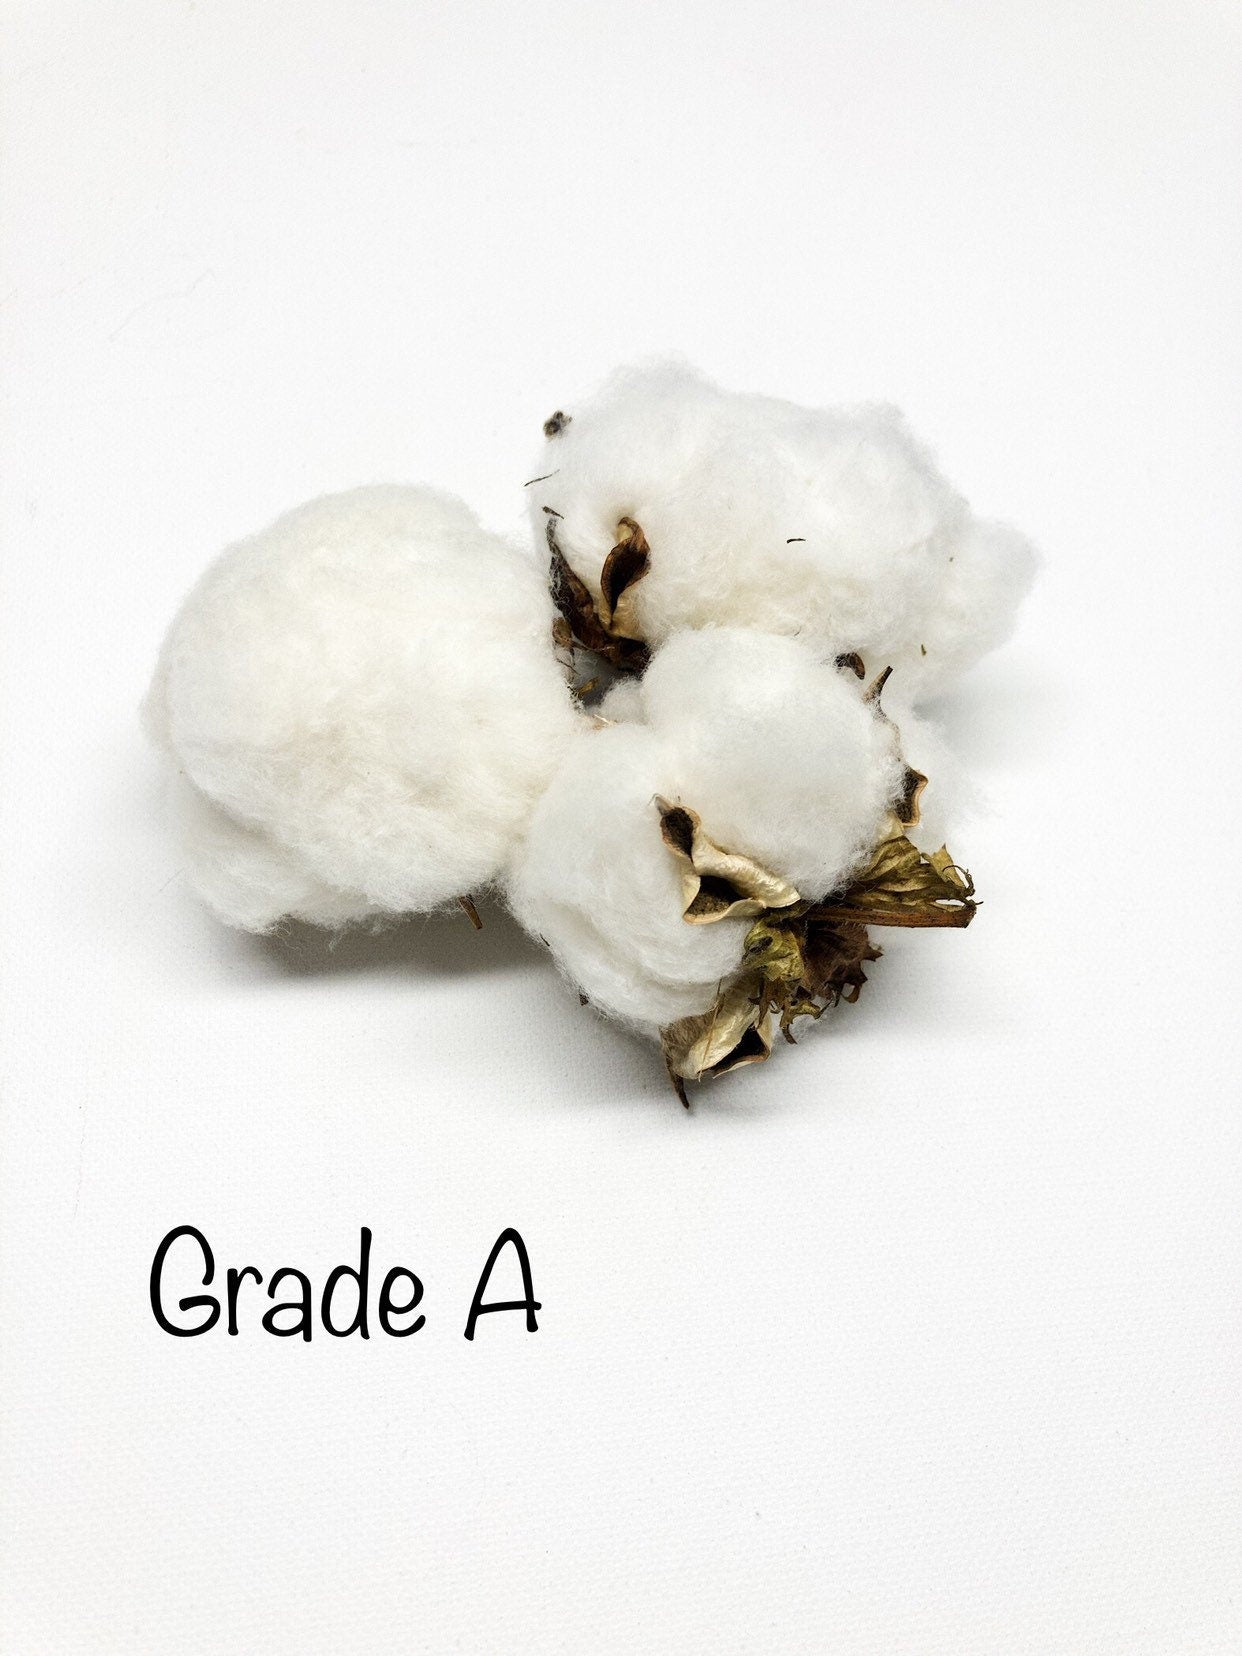 6 Cotton Heads, Natural, Dried, Wreath DIY, White Flower, Photography Props, Balls, Cotton Branch, Fall, Favors,